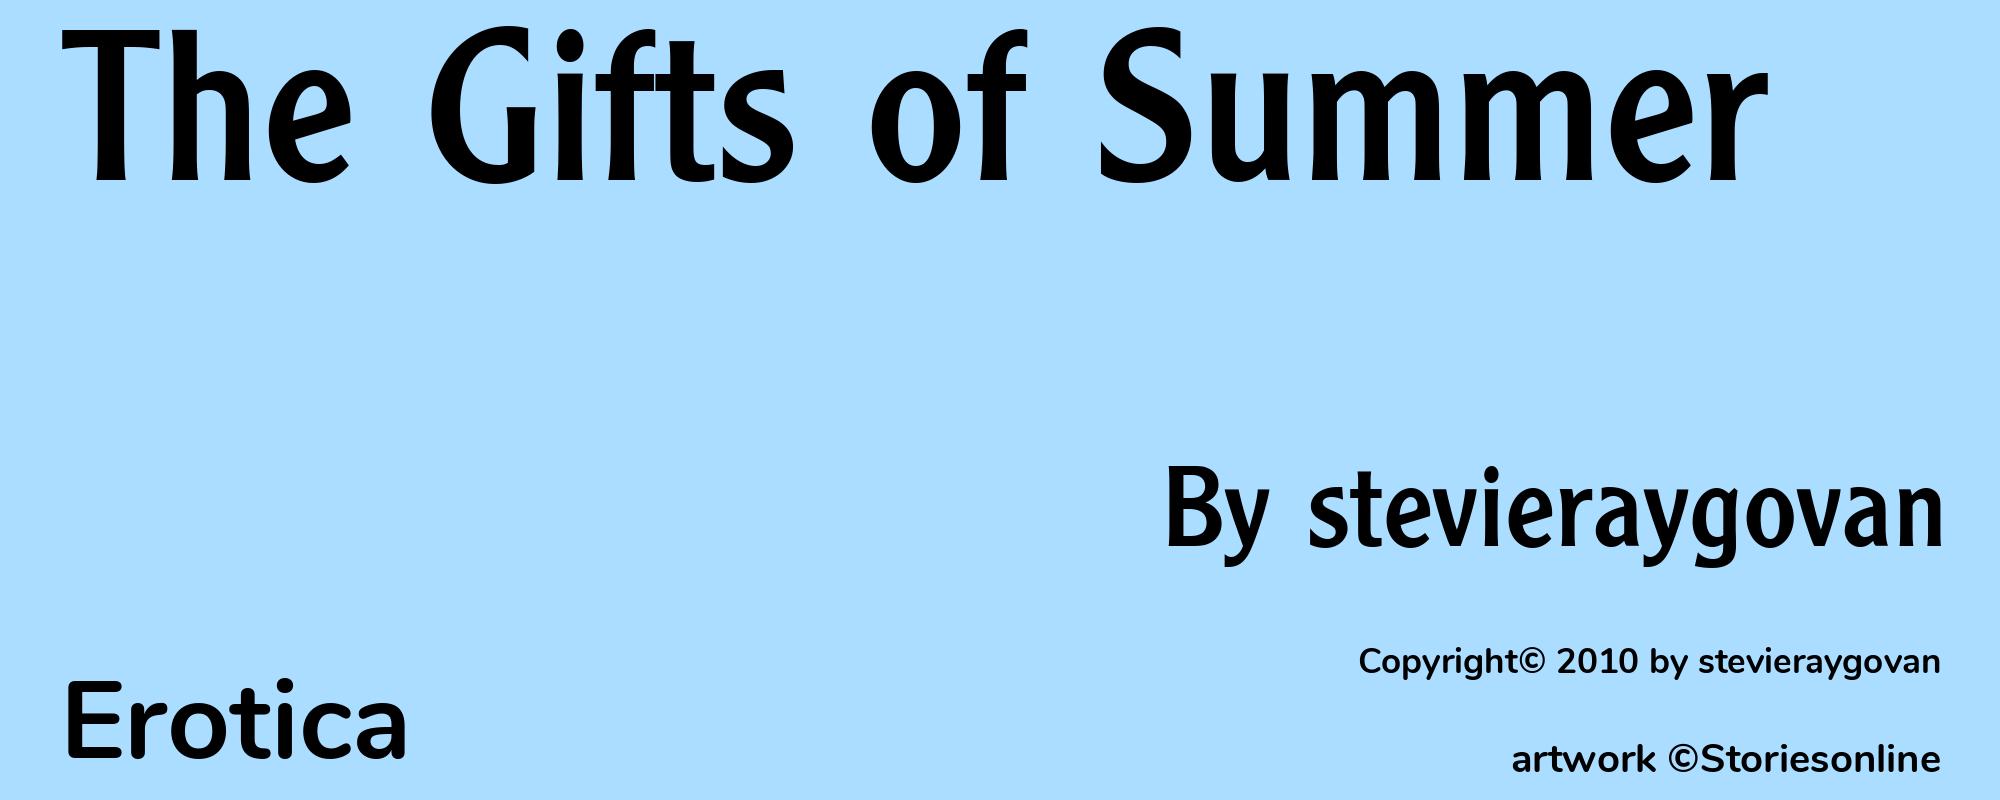 The Gifts of Summer - Cover